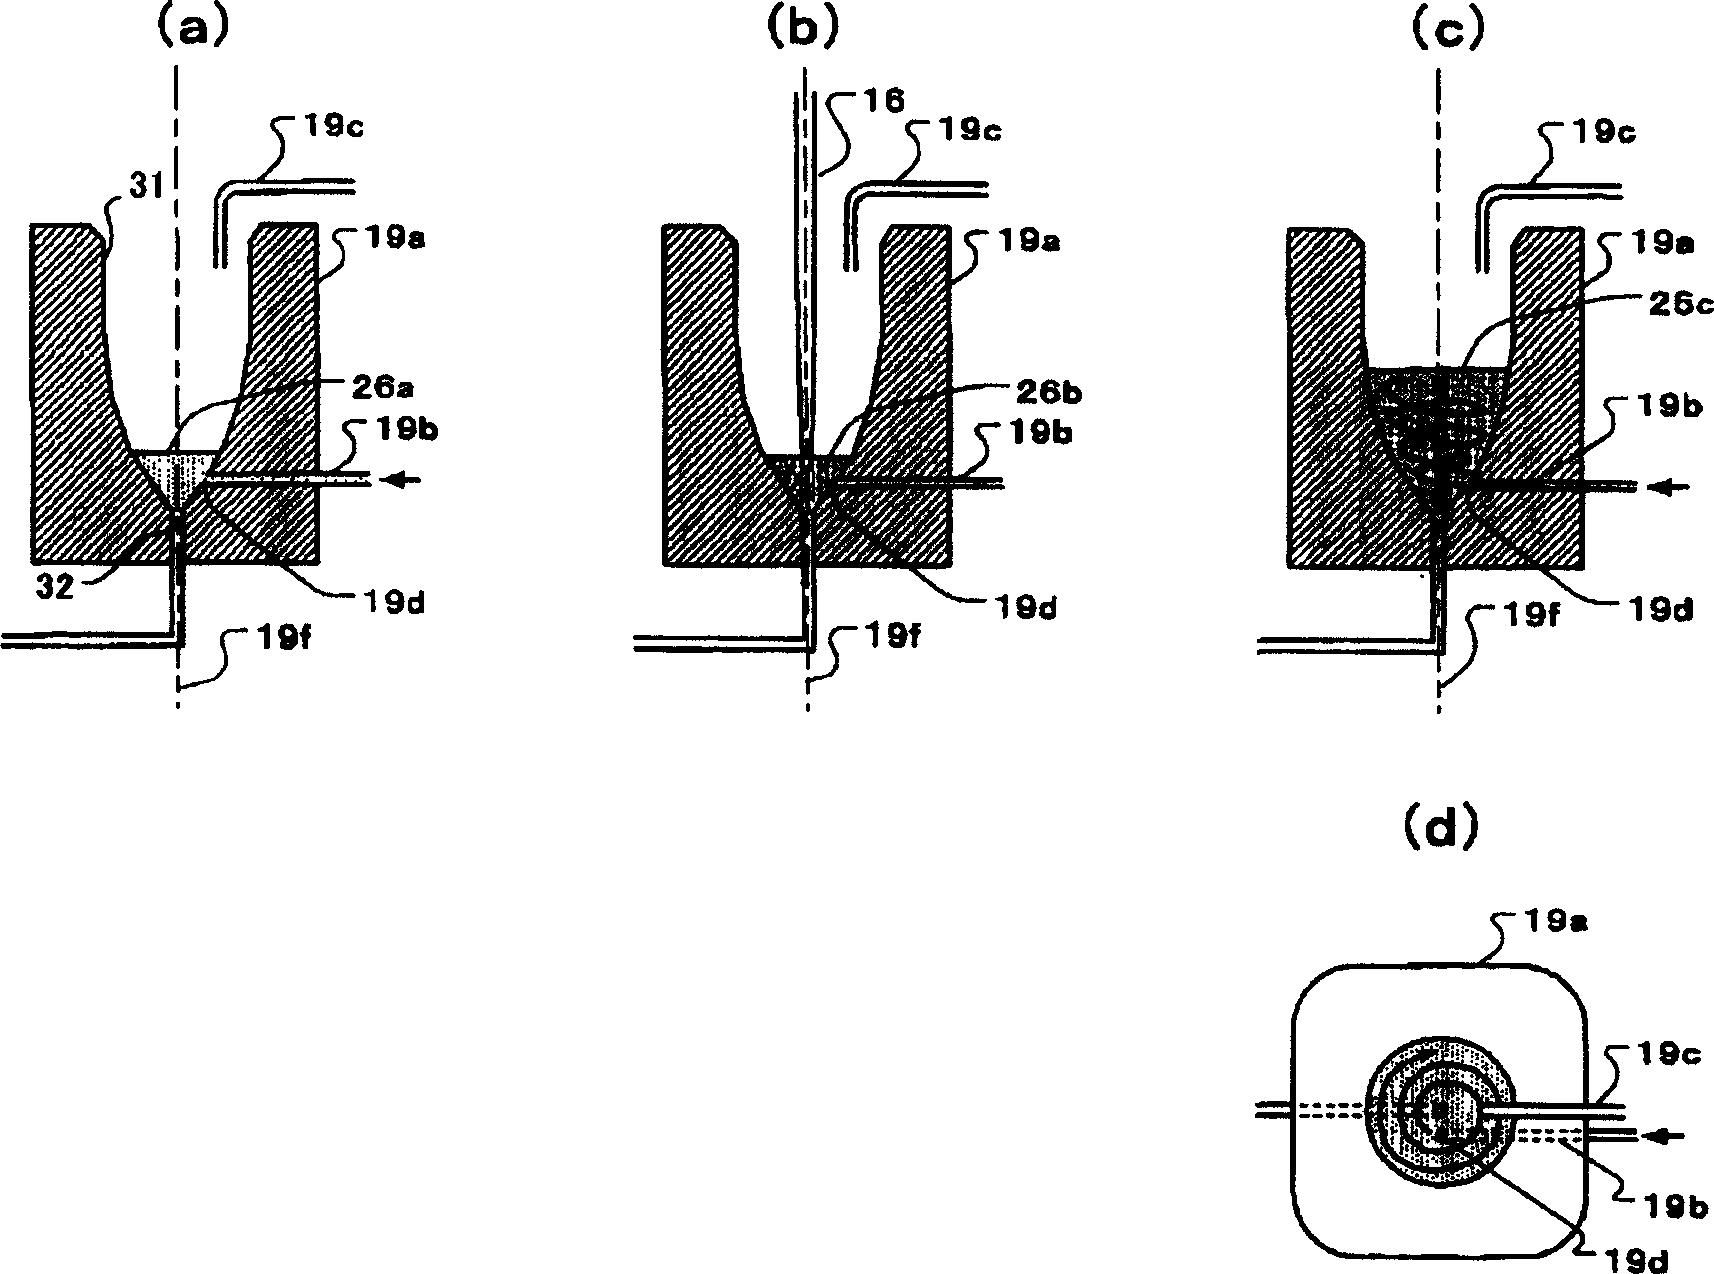 Chemical analyzer, method for dispensing and dilution cup